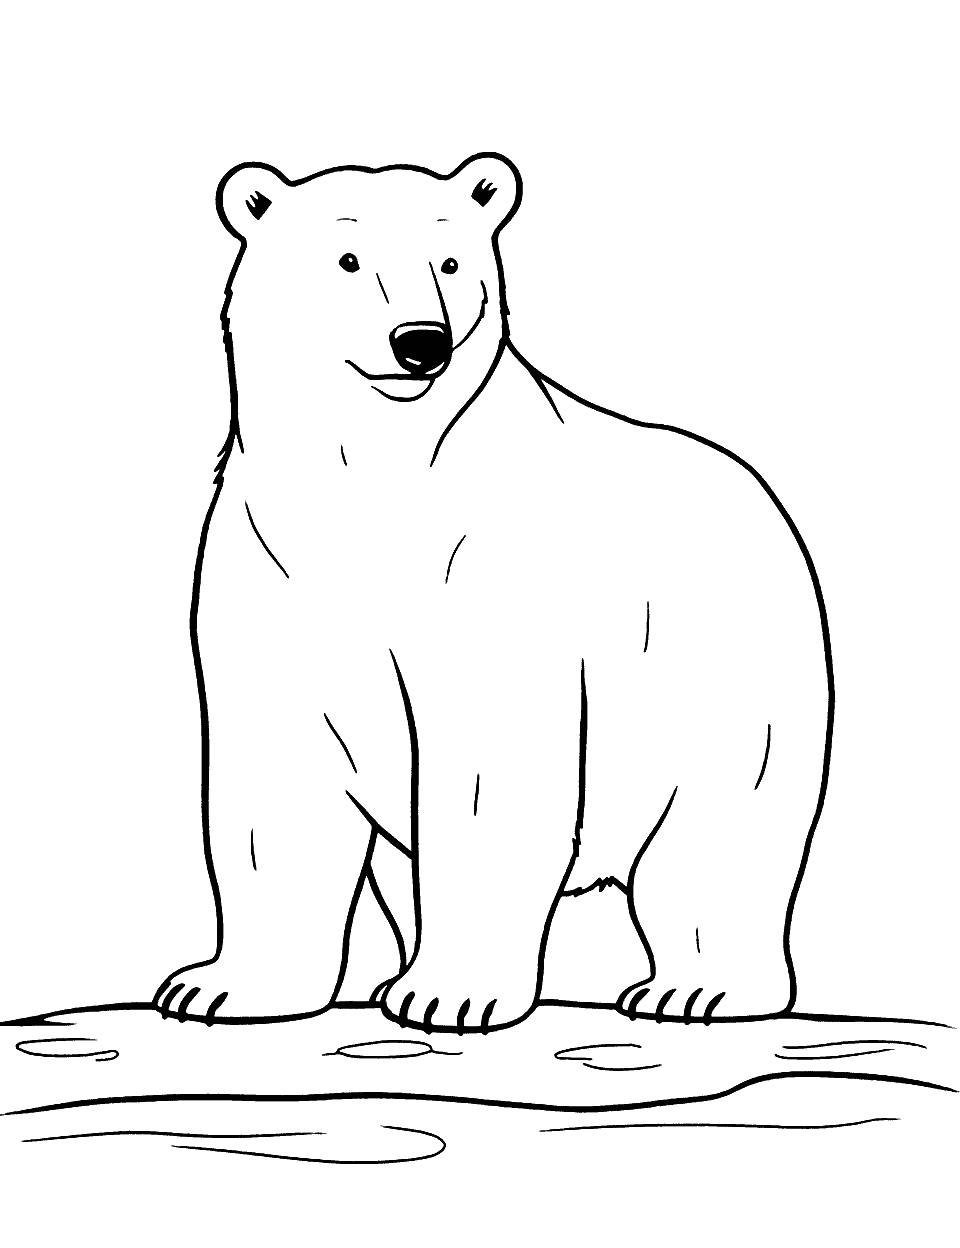 Polar Bear in the Arctic Cute Coloring Page - A polar bear standing on ice in a snowy Arctic landscape.